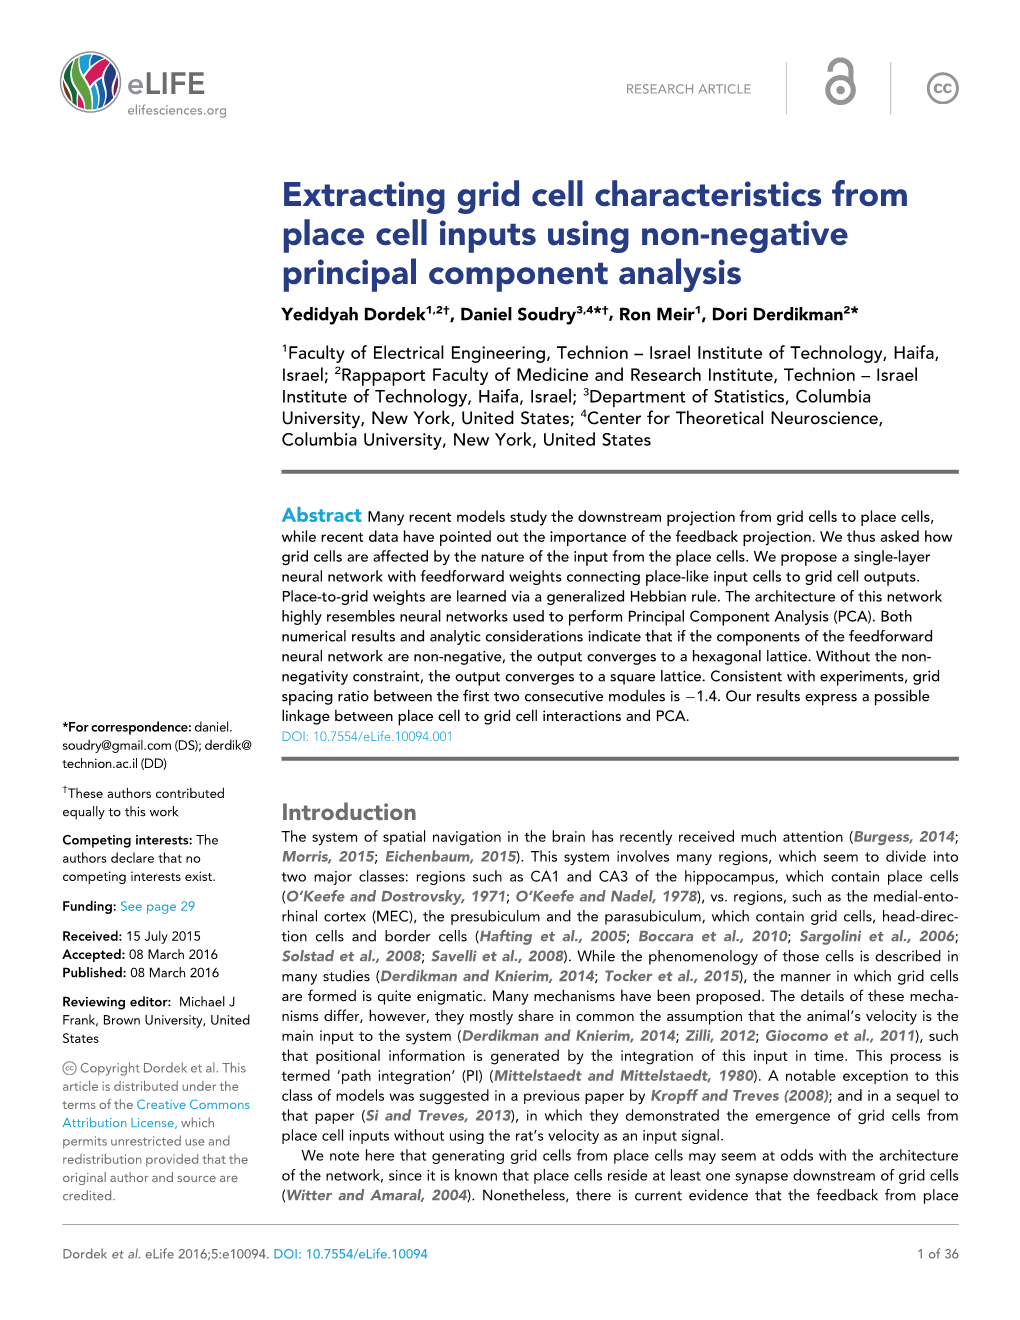 Extracting Grid Cell Characteristics from Place Cell Inputs Using Non